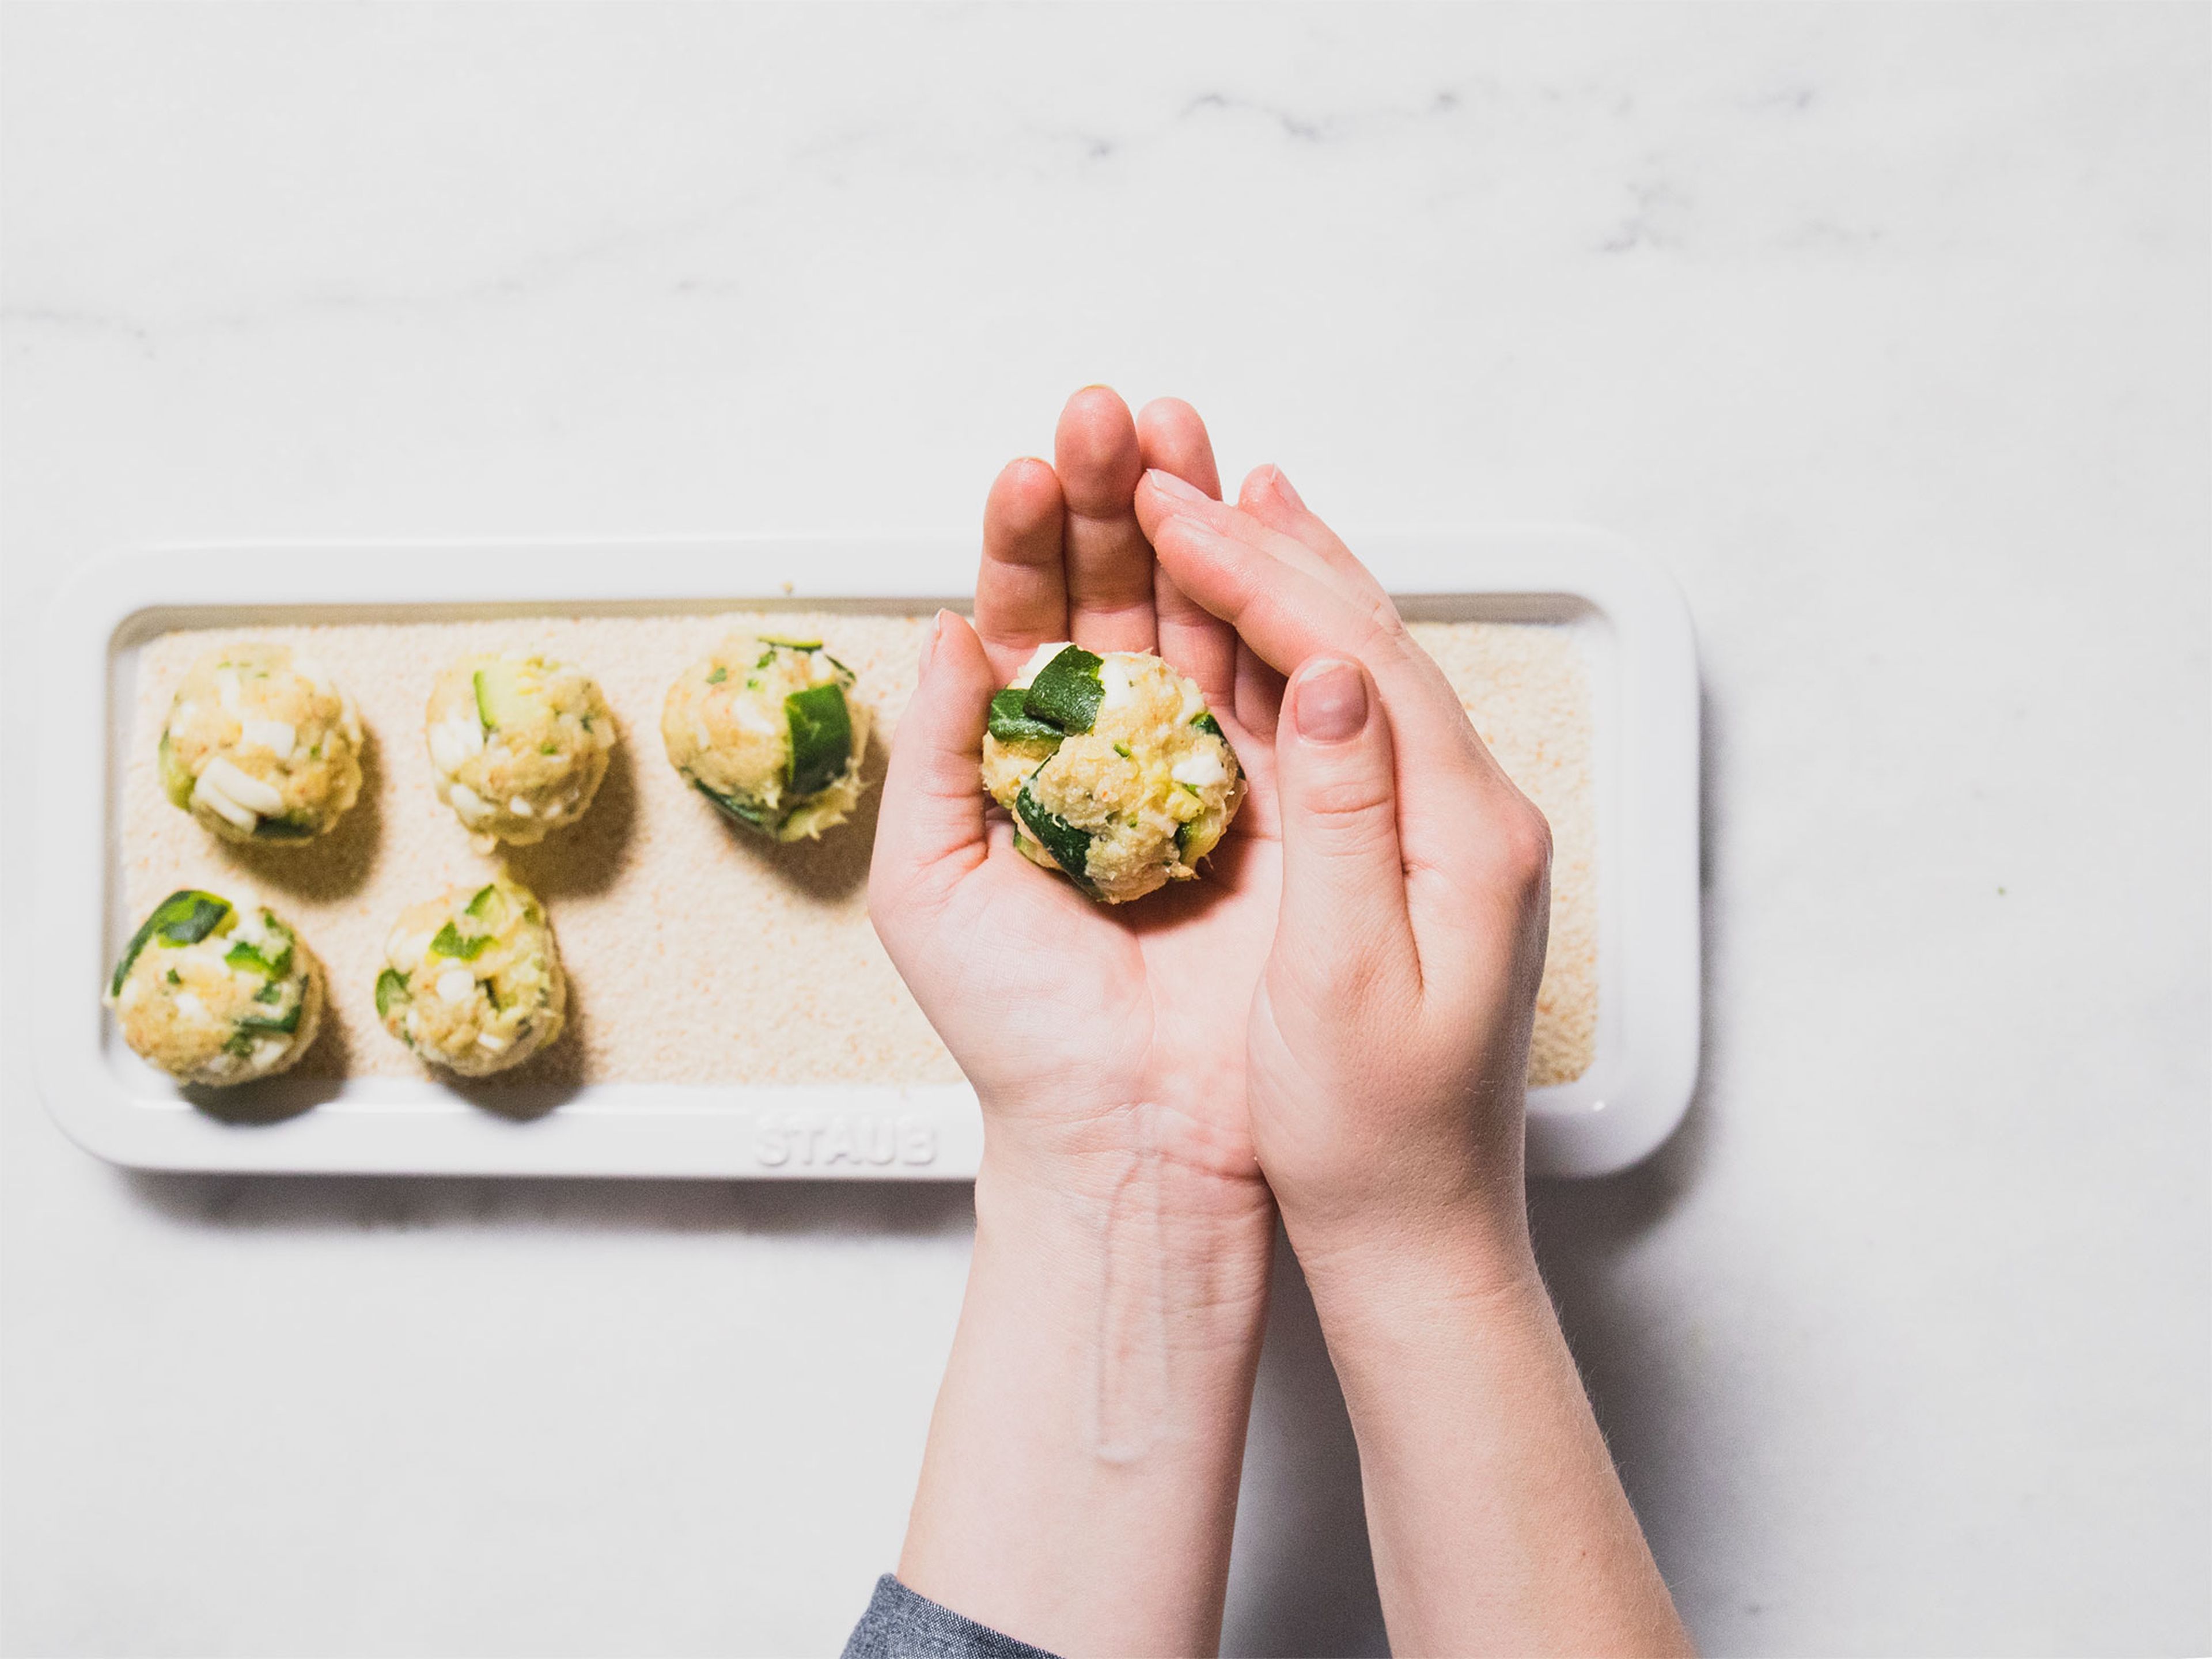 Transfer zucchini mixture to a bowl and crush with a fork. Add marjoram, mozzarella, Parmesan, half the breadcrumbs, egg, Piment d'Espelette, salt, and pepper. Mix to combine. Using your hands, shape the mixture into small balls. Roll them in remaining breadcrumbs.